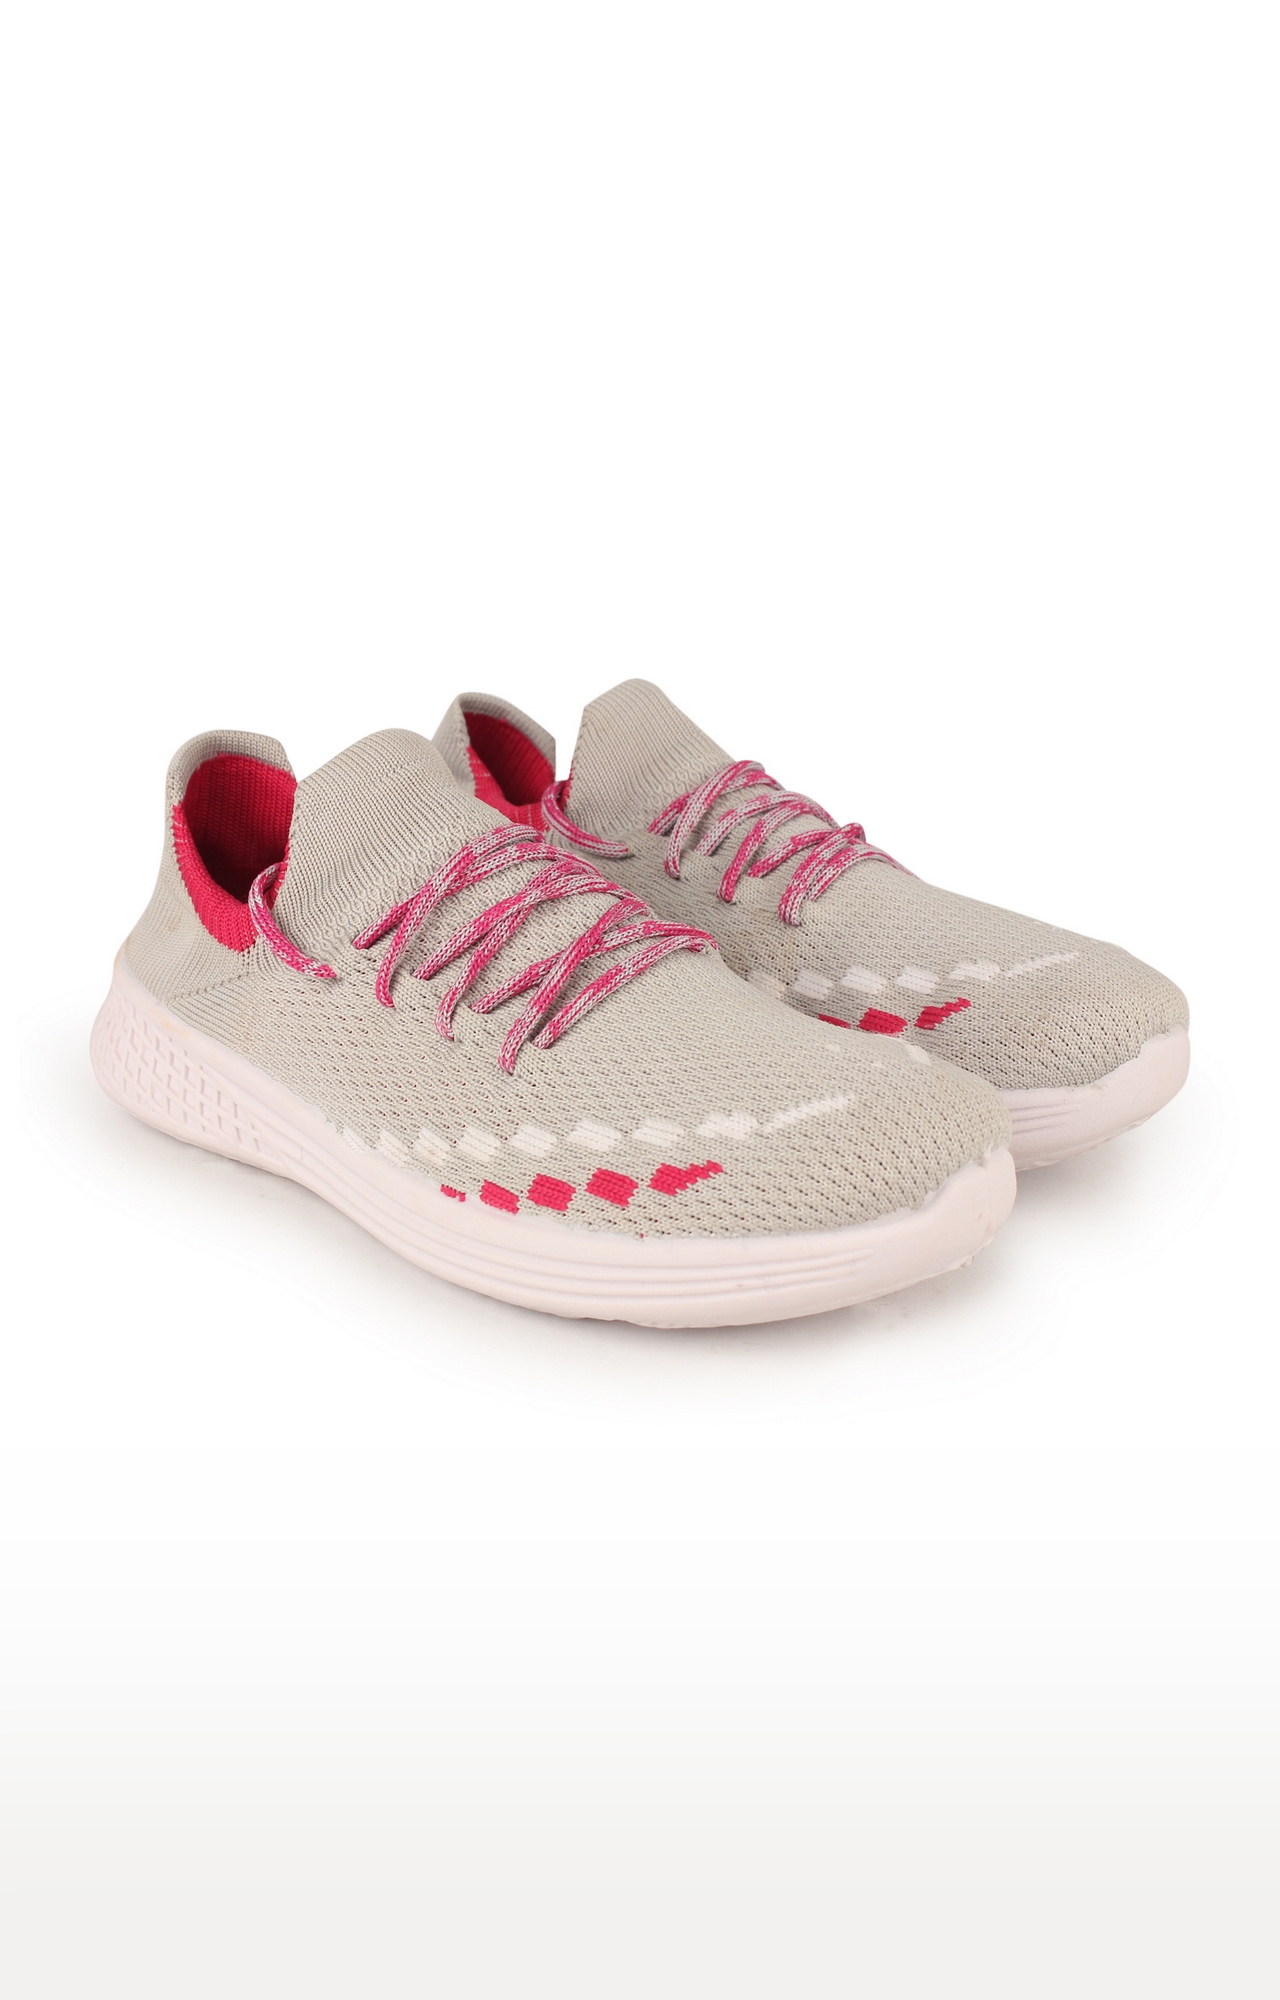 RNT LSS 01 Light Grey and Pink Shoes for Women